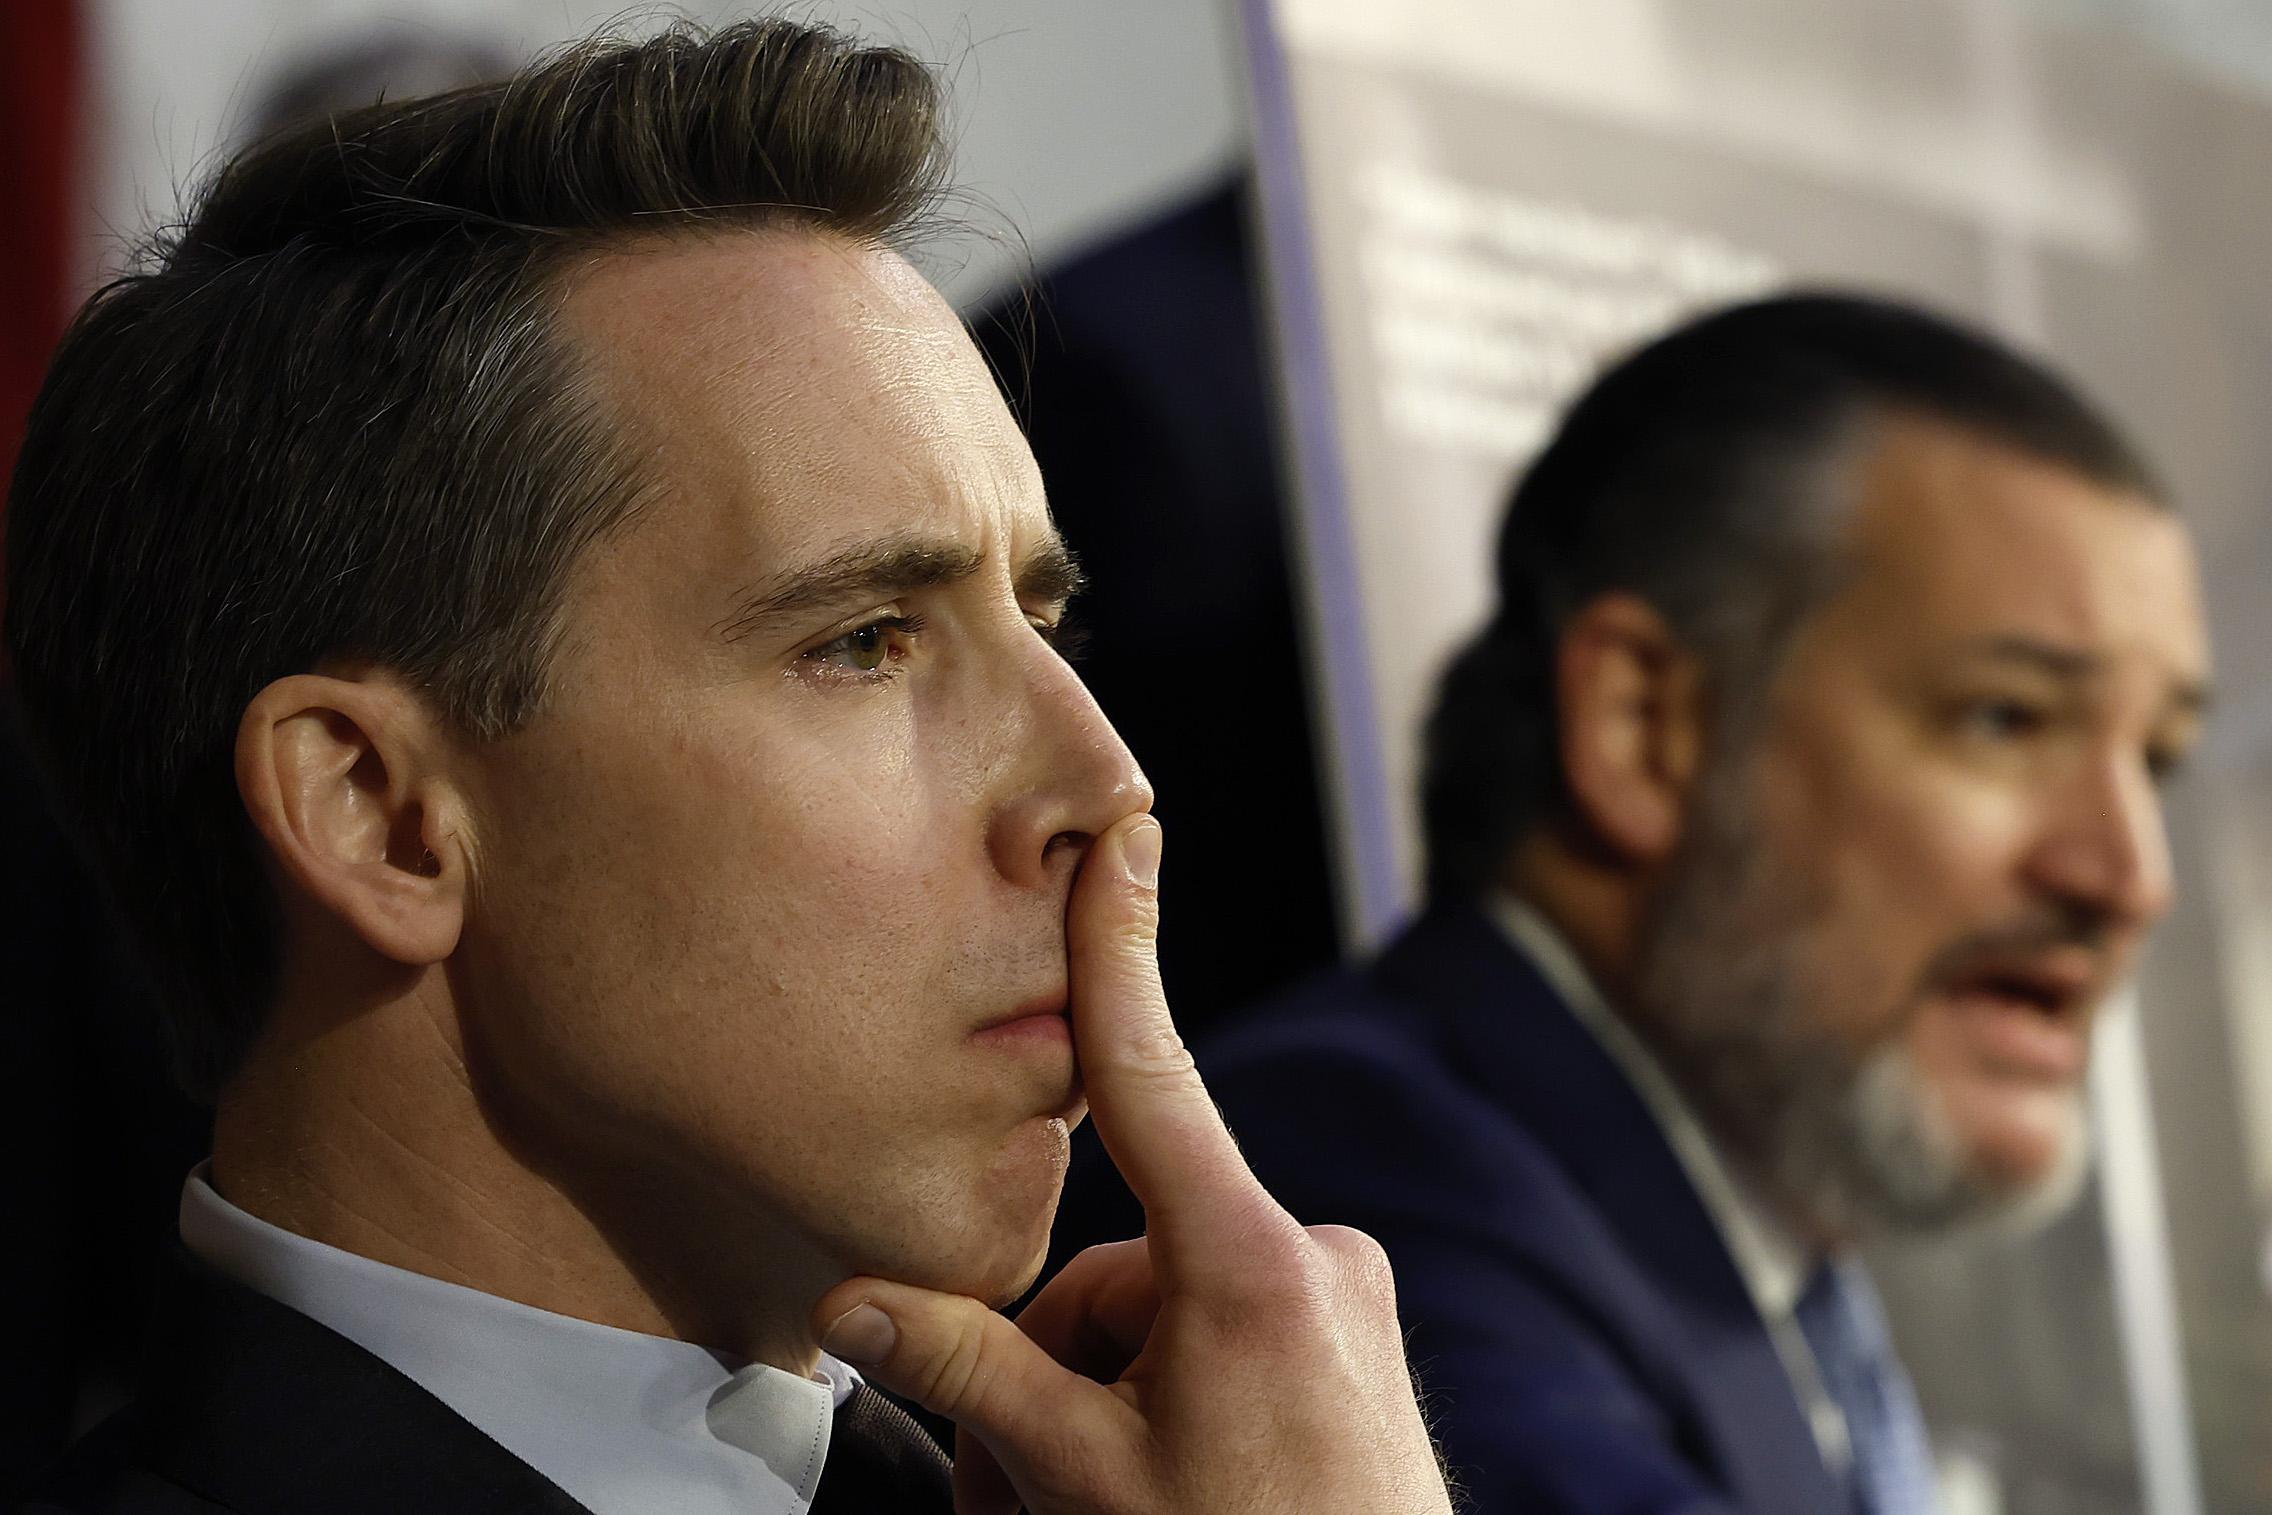 Hawley, whose profile is in the foreground, presses a finger to his nose and lip, in an expression of concentration. Behind him, out of focus, Ted Cruz appears to be speaking.  